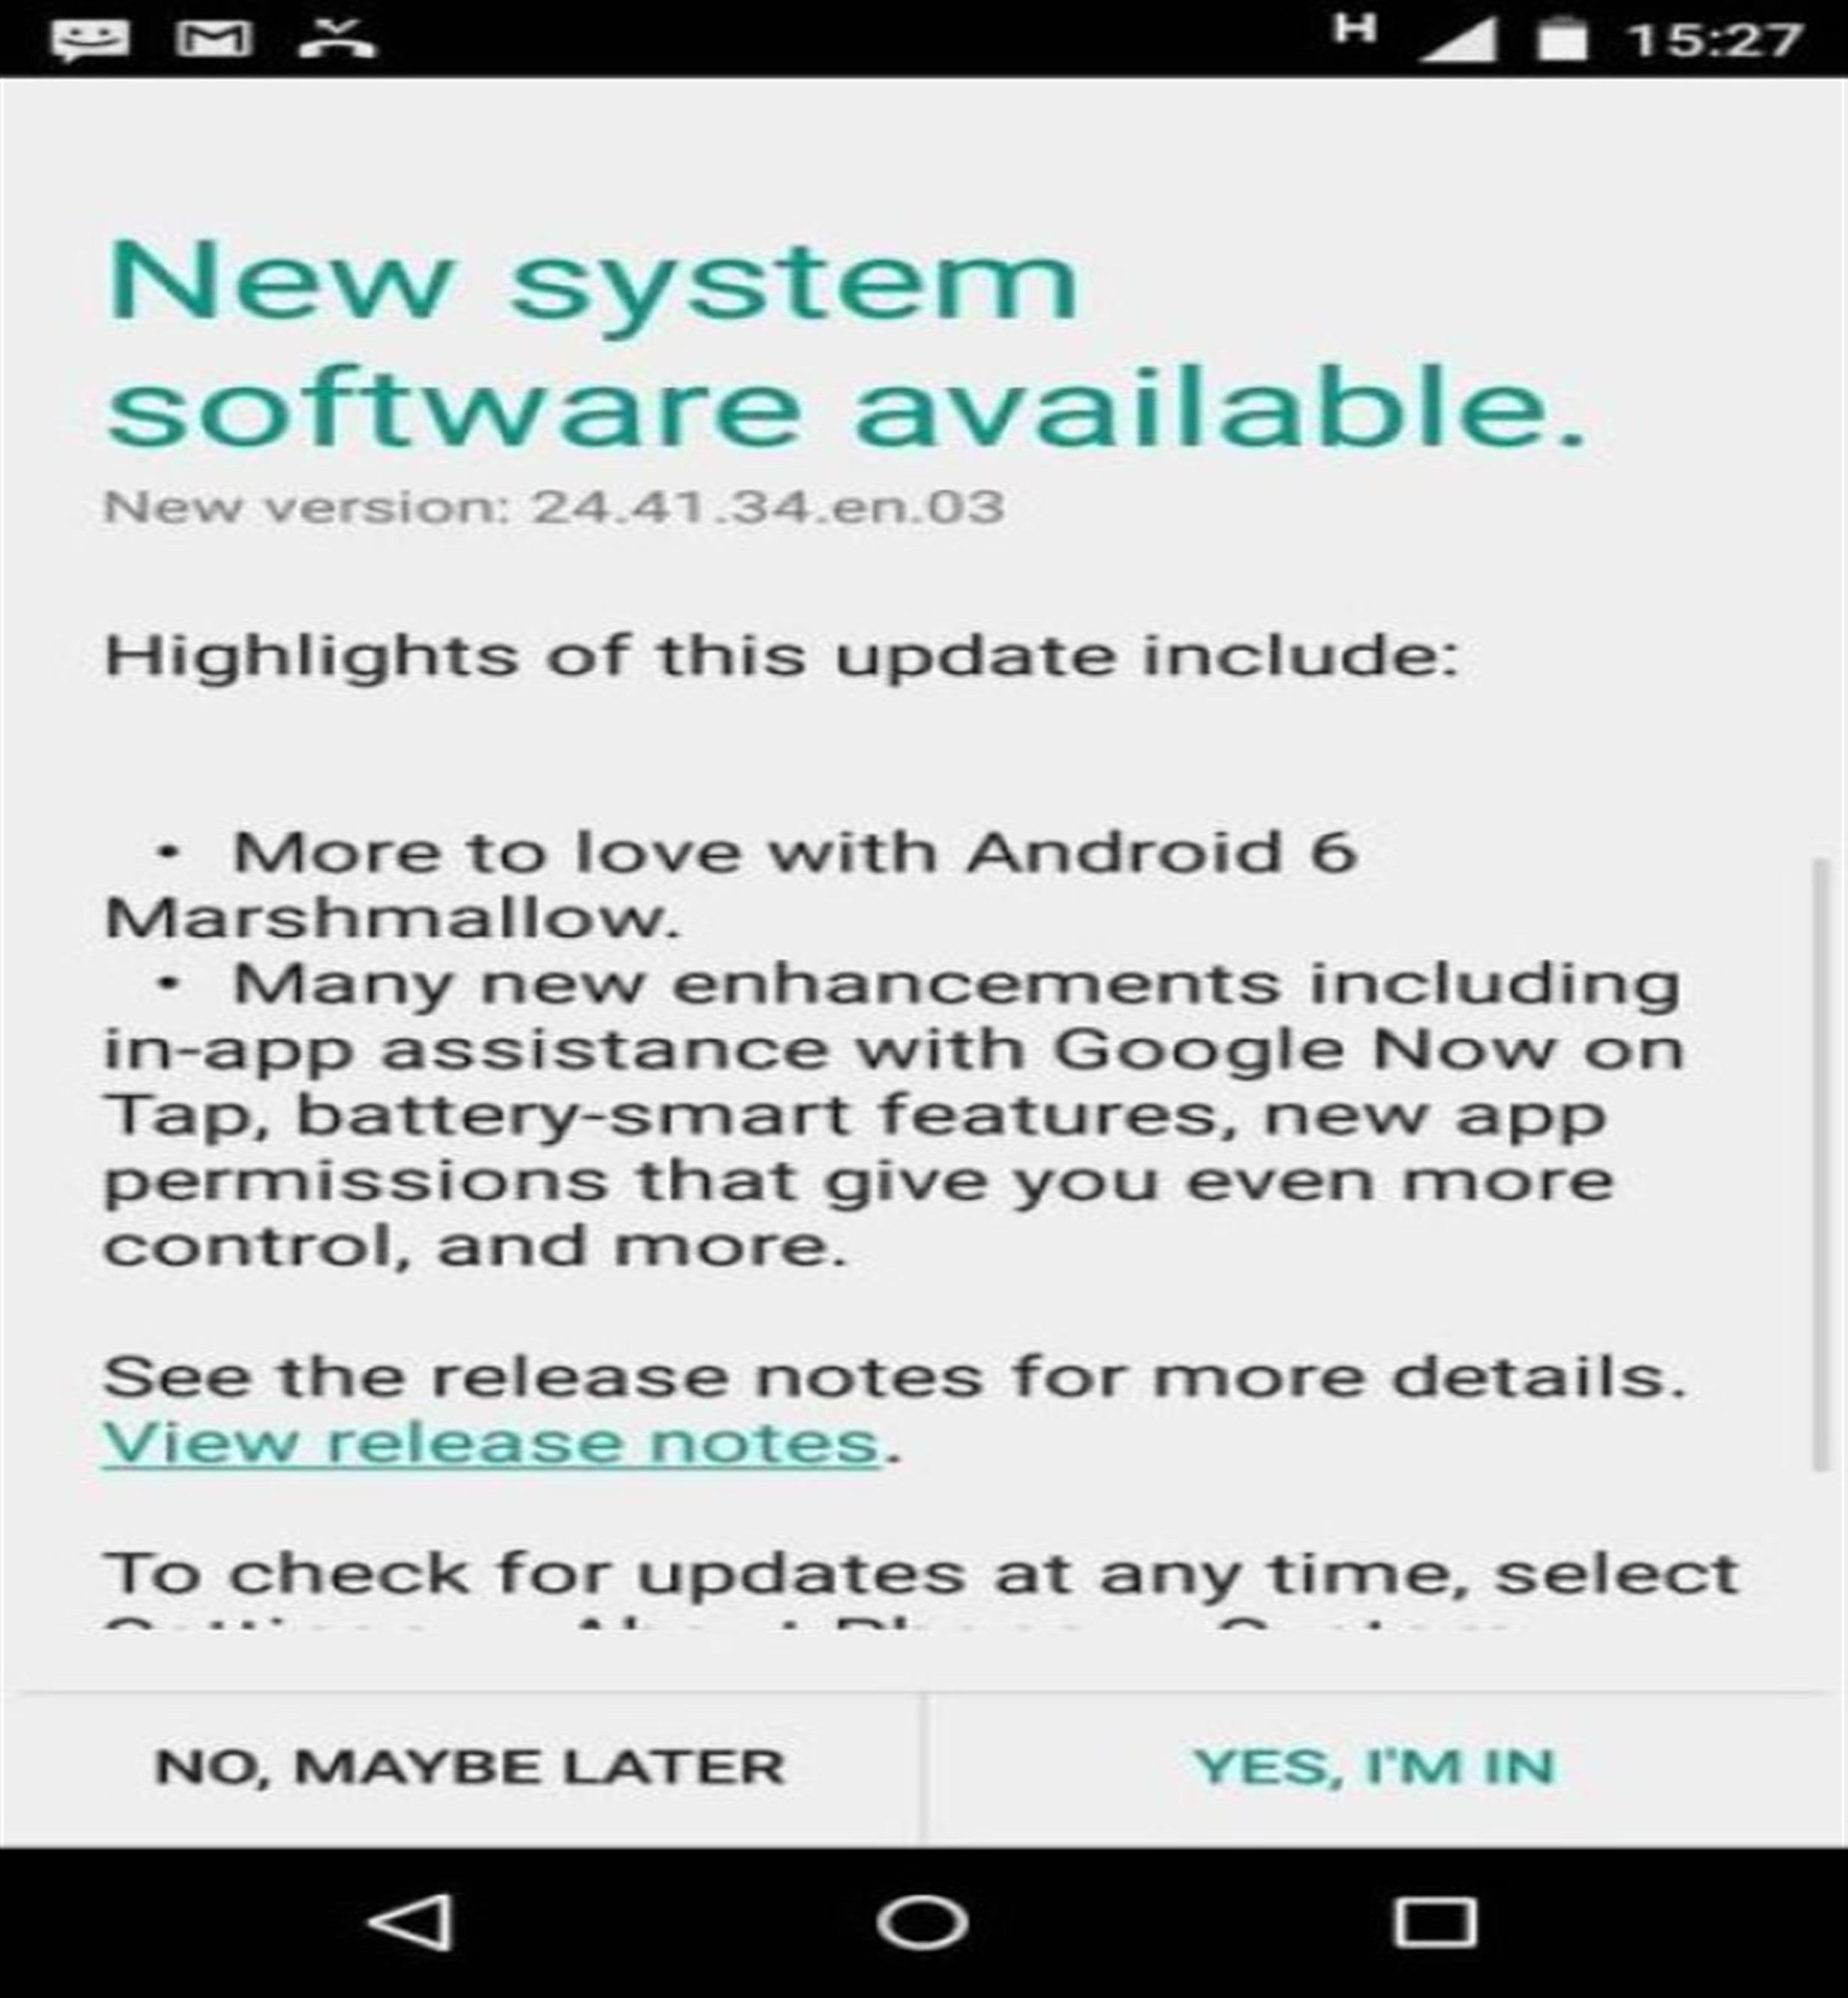 Users-can-update-their-smartphone-with-Mashmallow-from-settings-panel